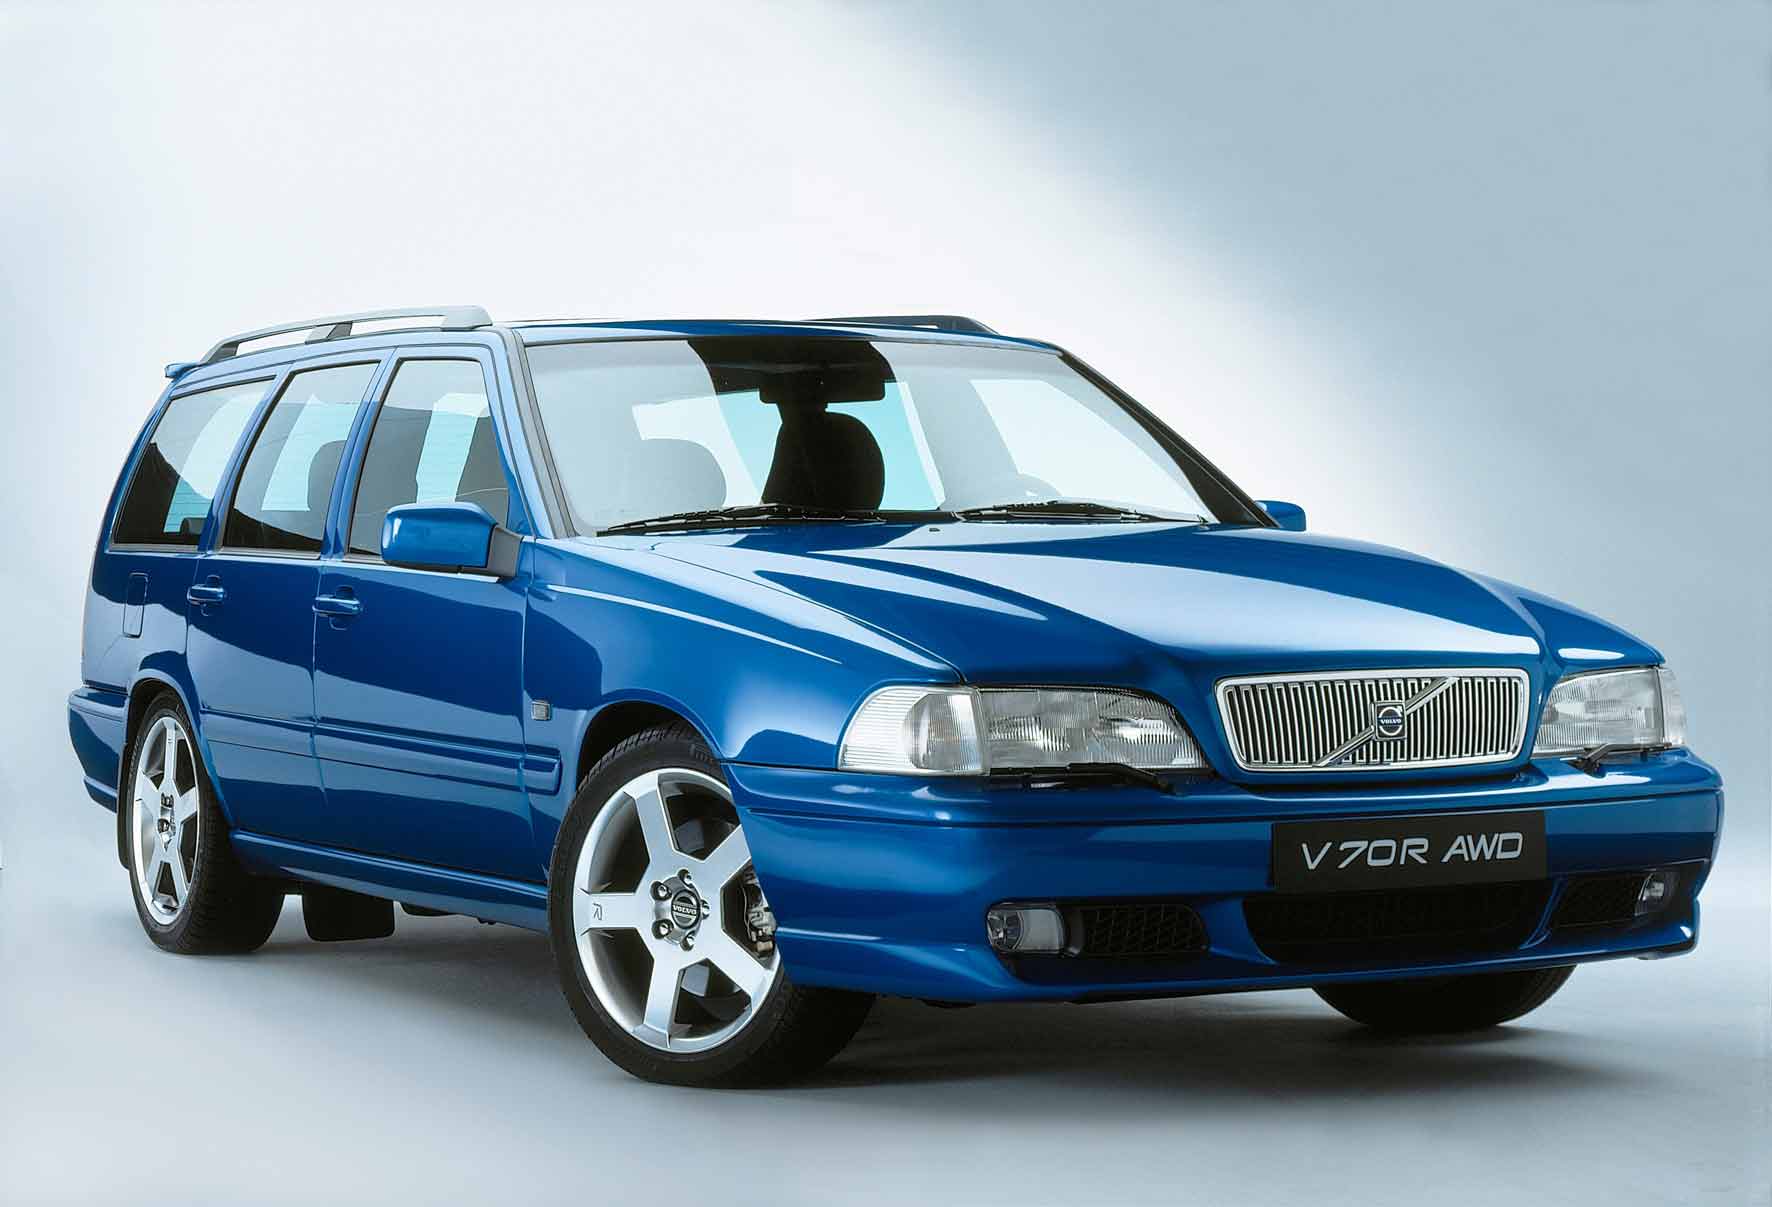 Neil Hates his 2000 V70 R. Here's Why.